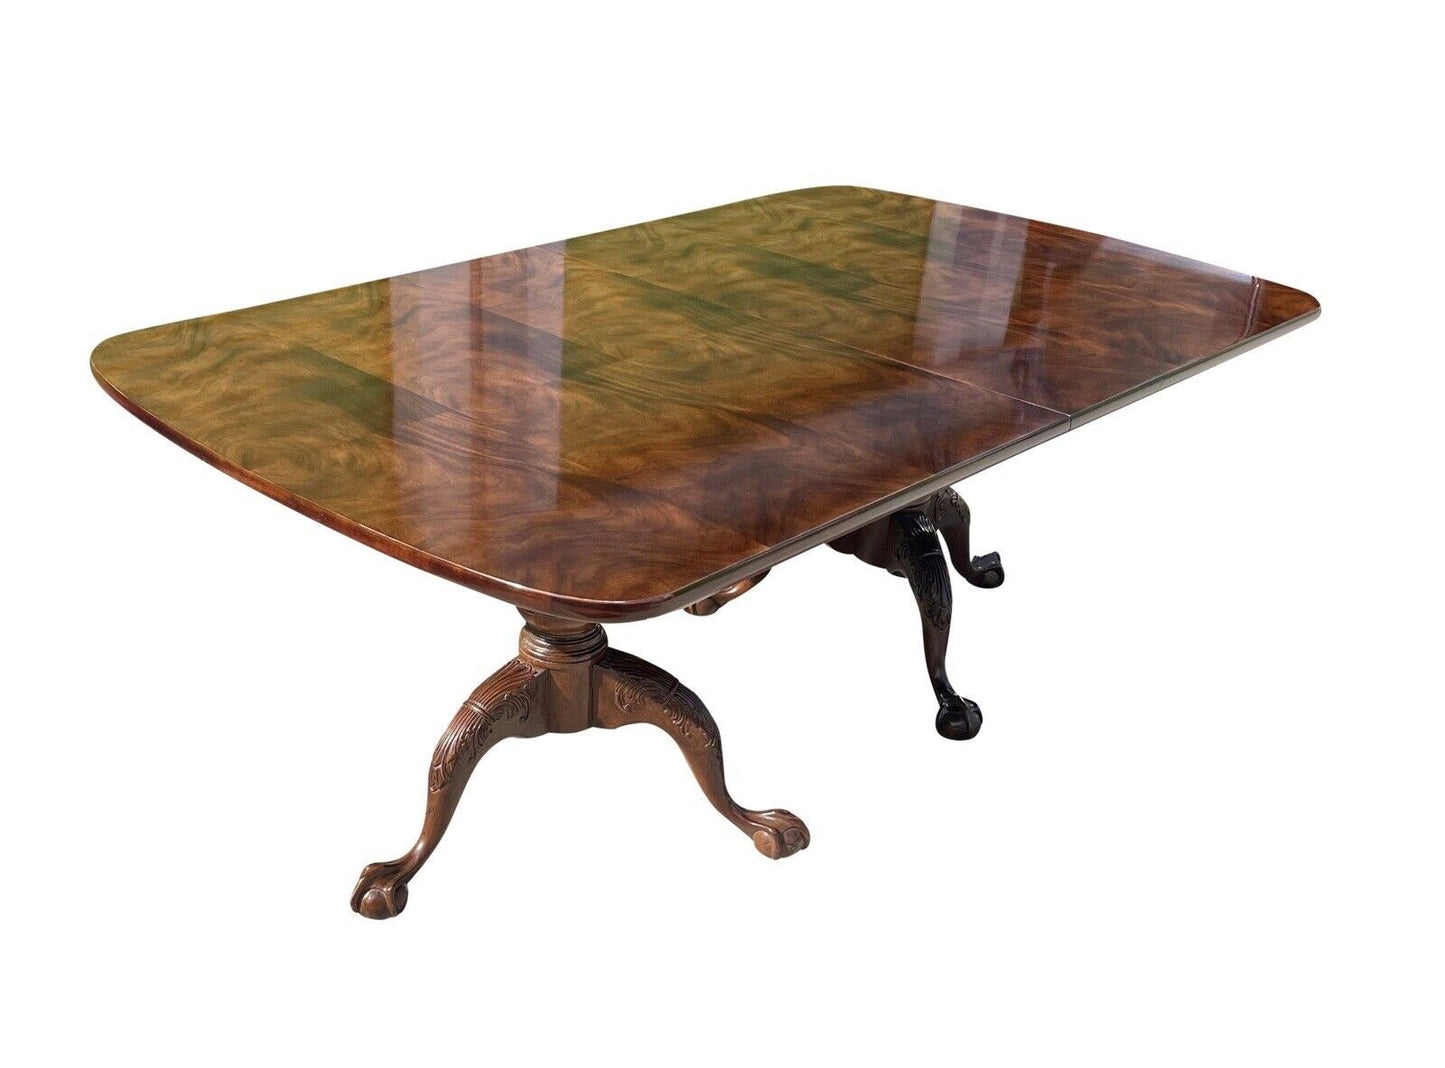 Chippendale Style Mahogany Ball & Claw Carved Dining Table by Henredon - 10 Feet